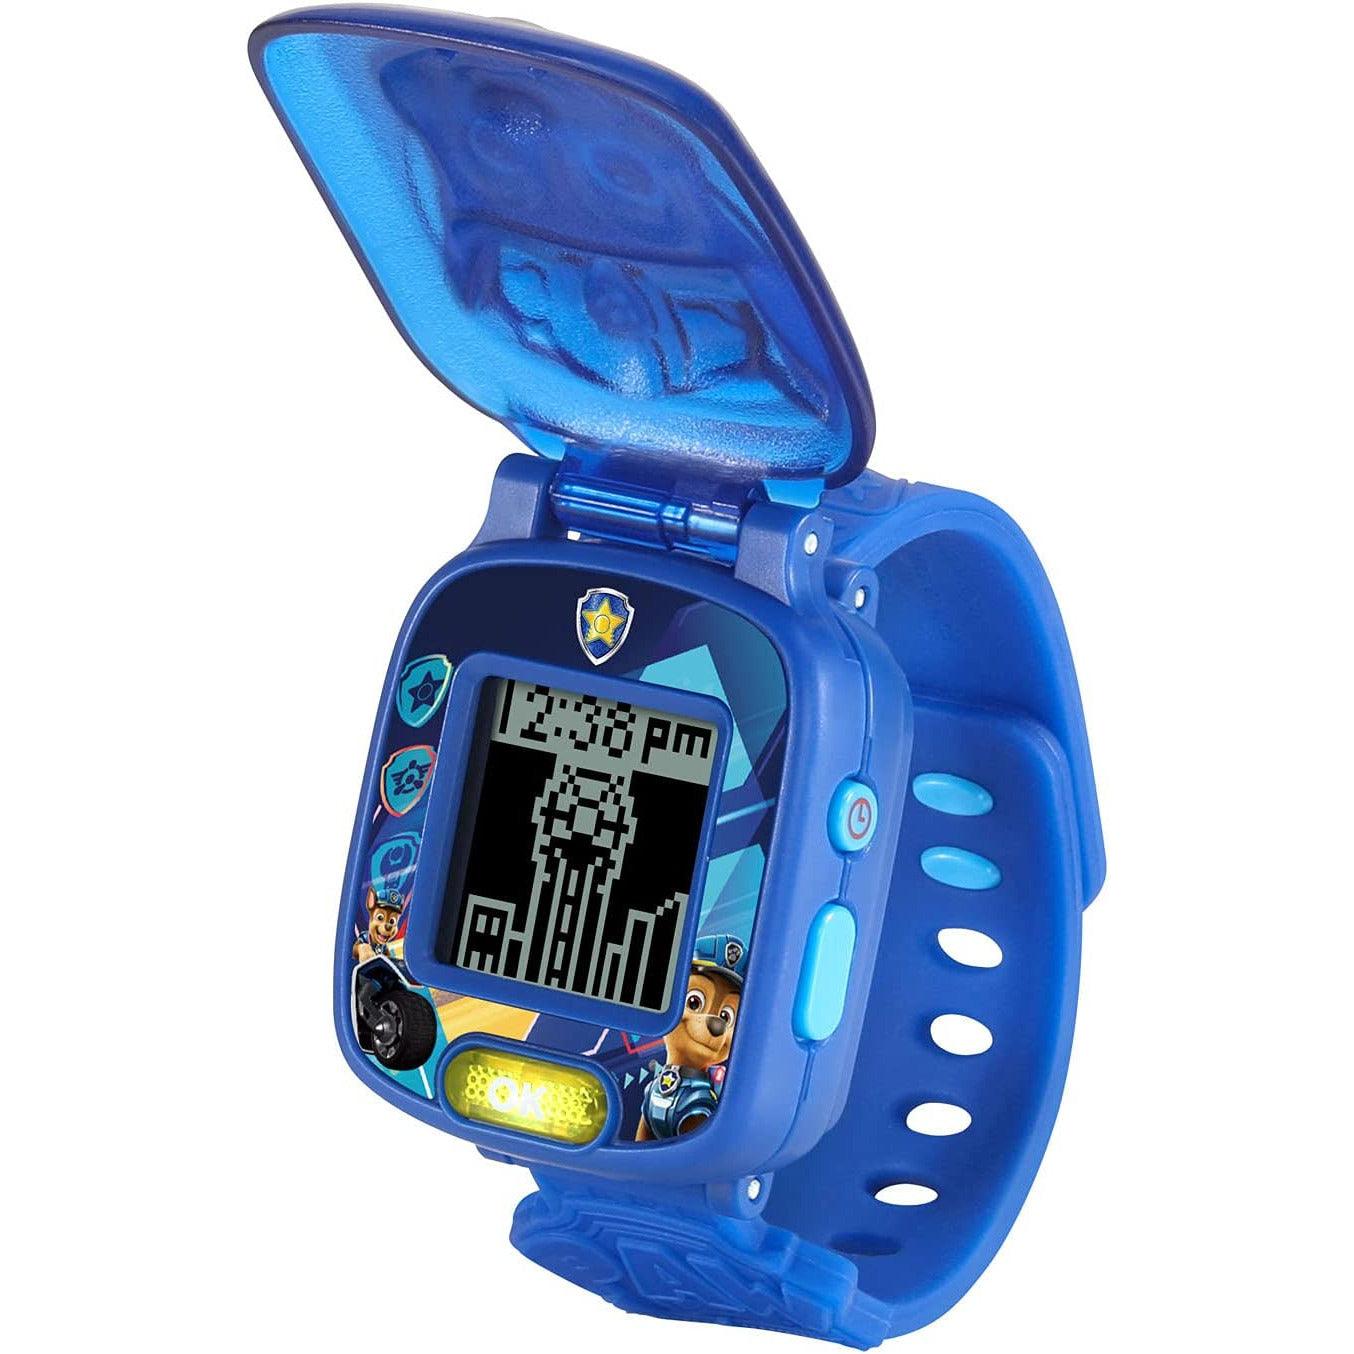 VTech PAW Patrol - The Movie Learning Watch, Chase for age 3-6 years